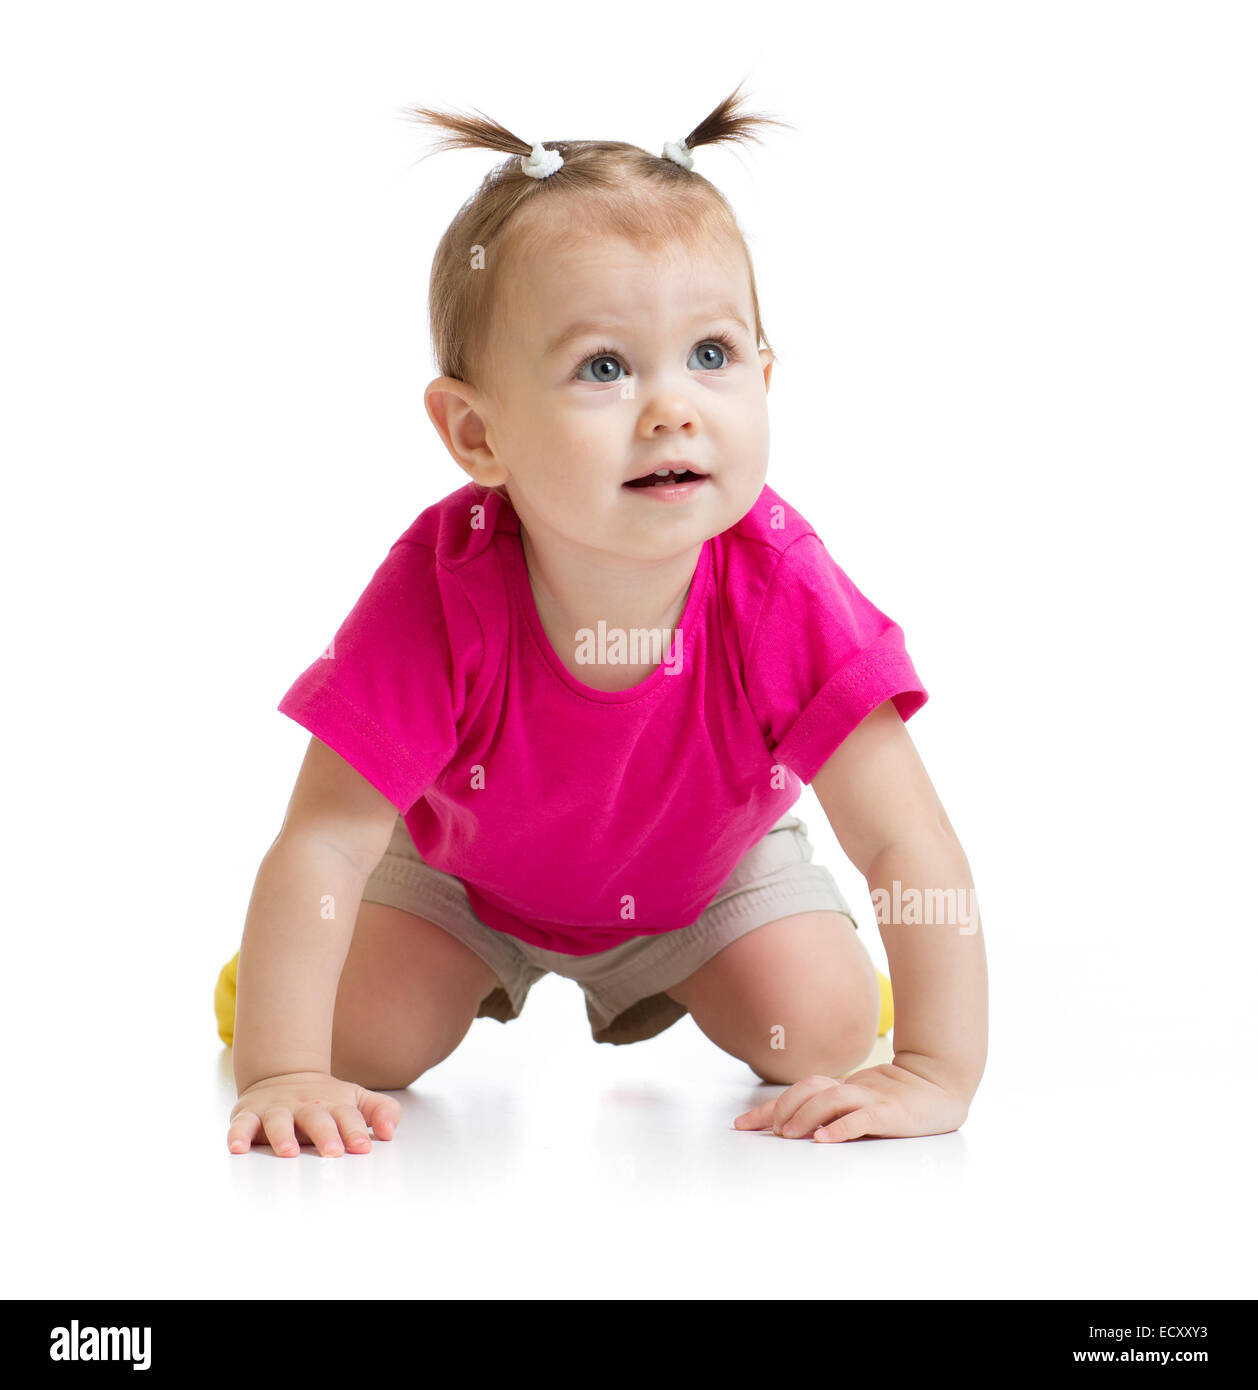 crawling baby front view isolated Stock Photo